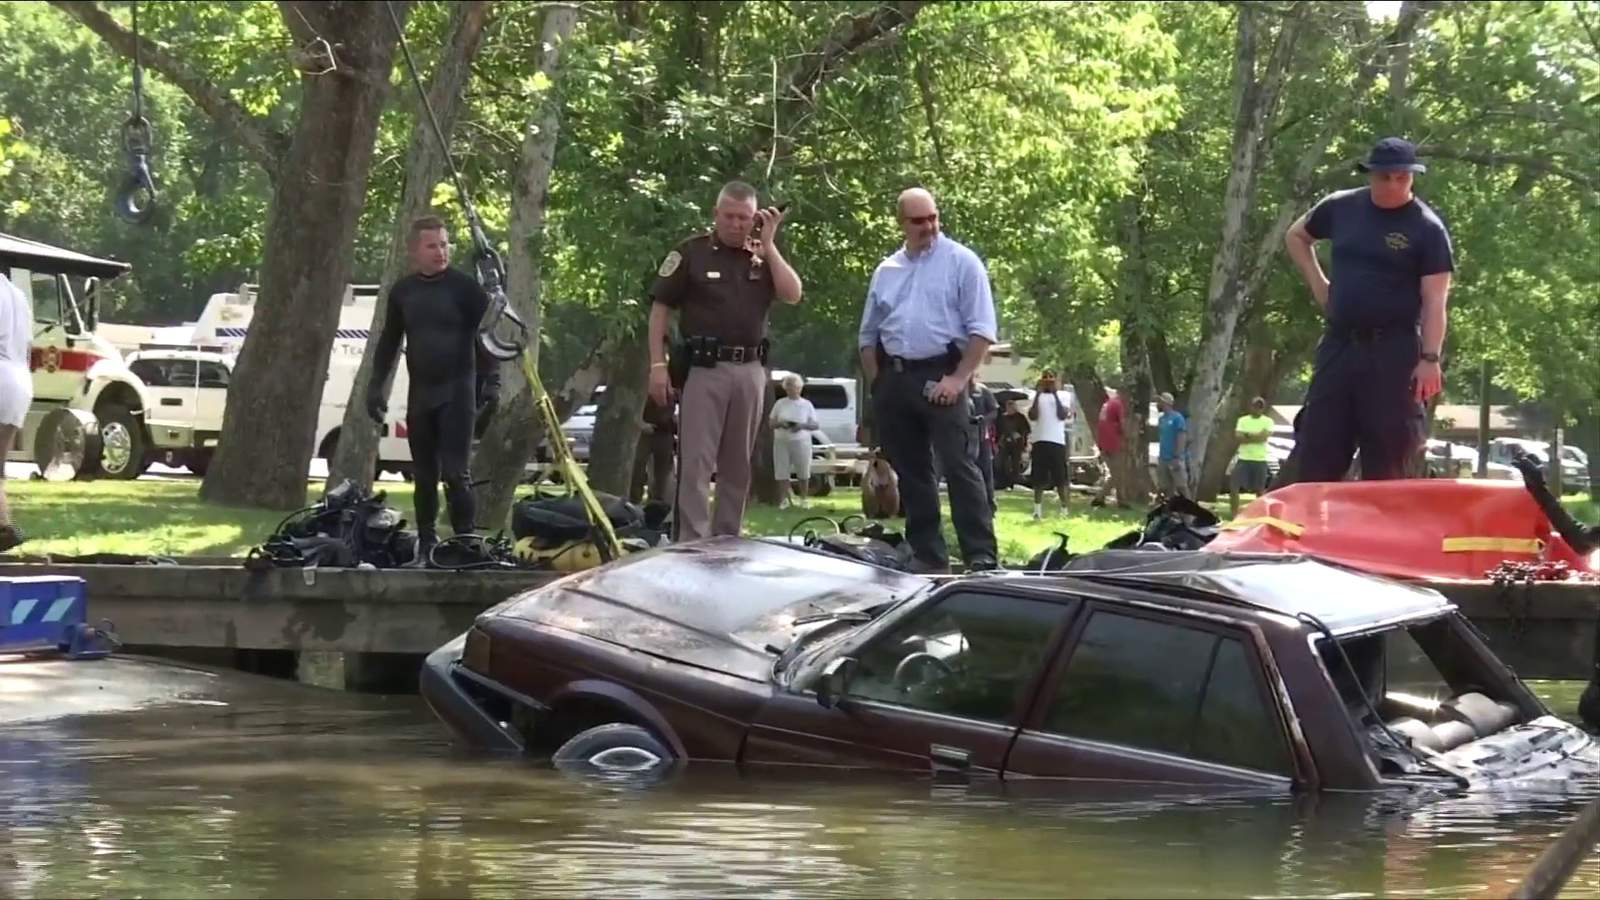 ‘That’s crazy. I come here all the time’: Police pull three cars out of James River, one with human remains